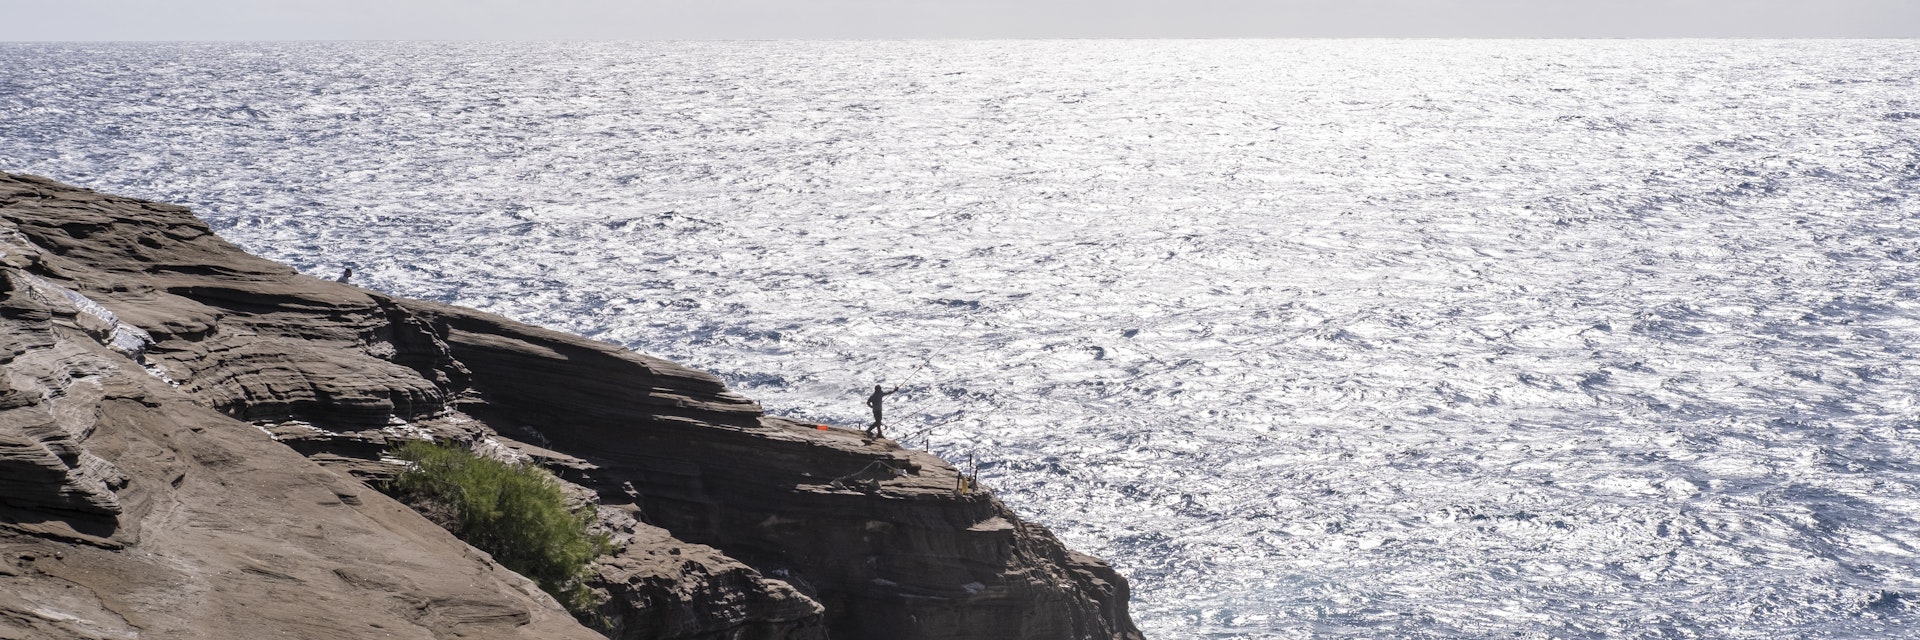 There is a fisherman about to cast his line in the water over a tall cliff. Spitting Caves Hawaii is a hidden gem of East Oahu.